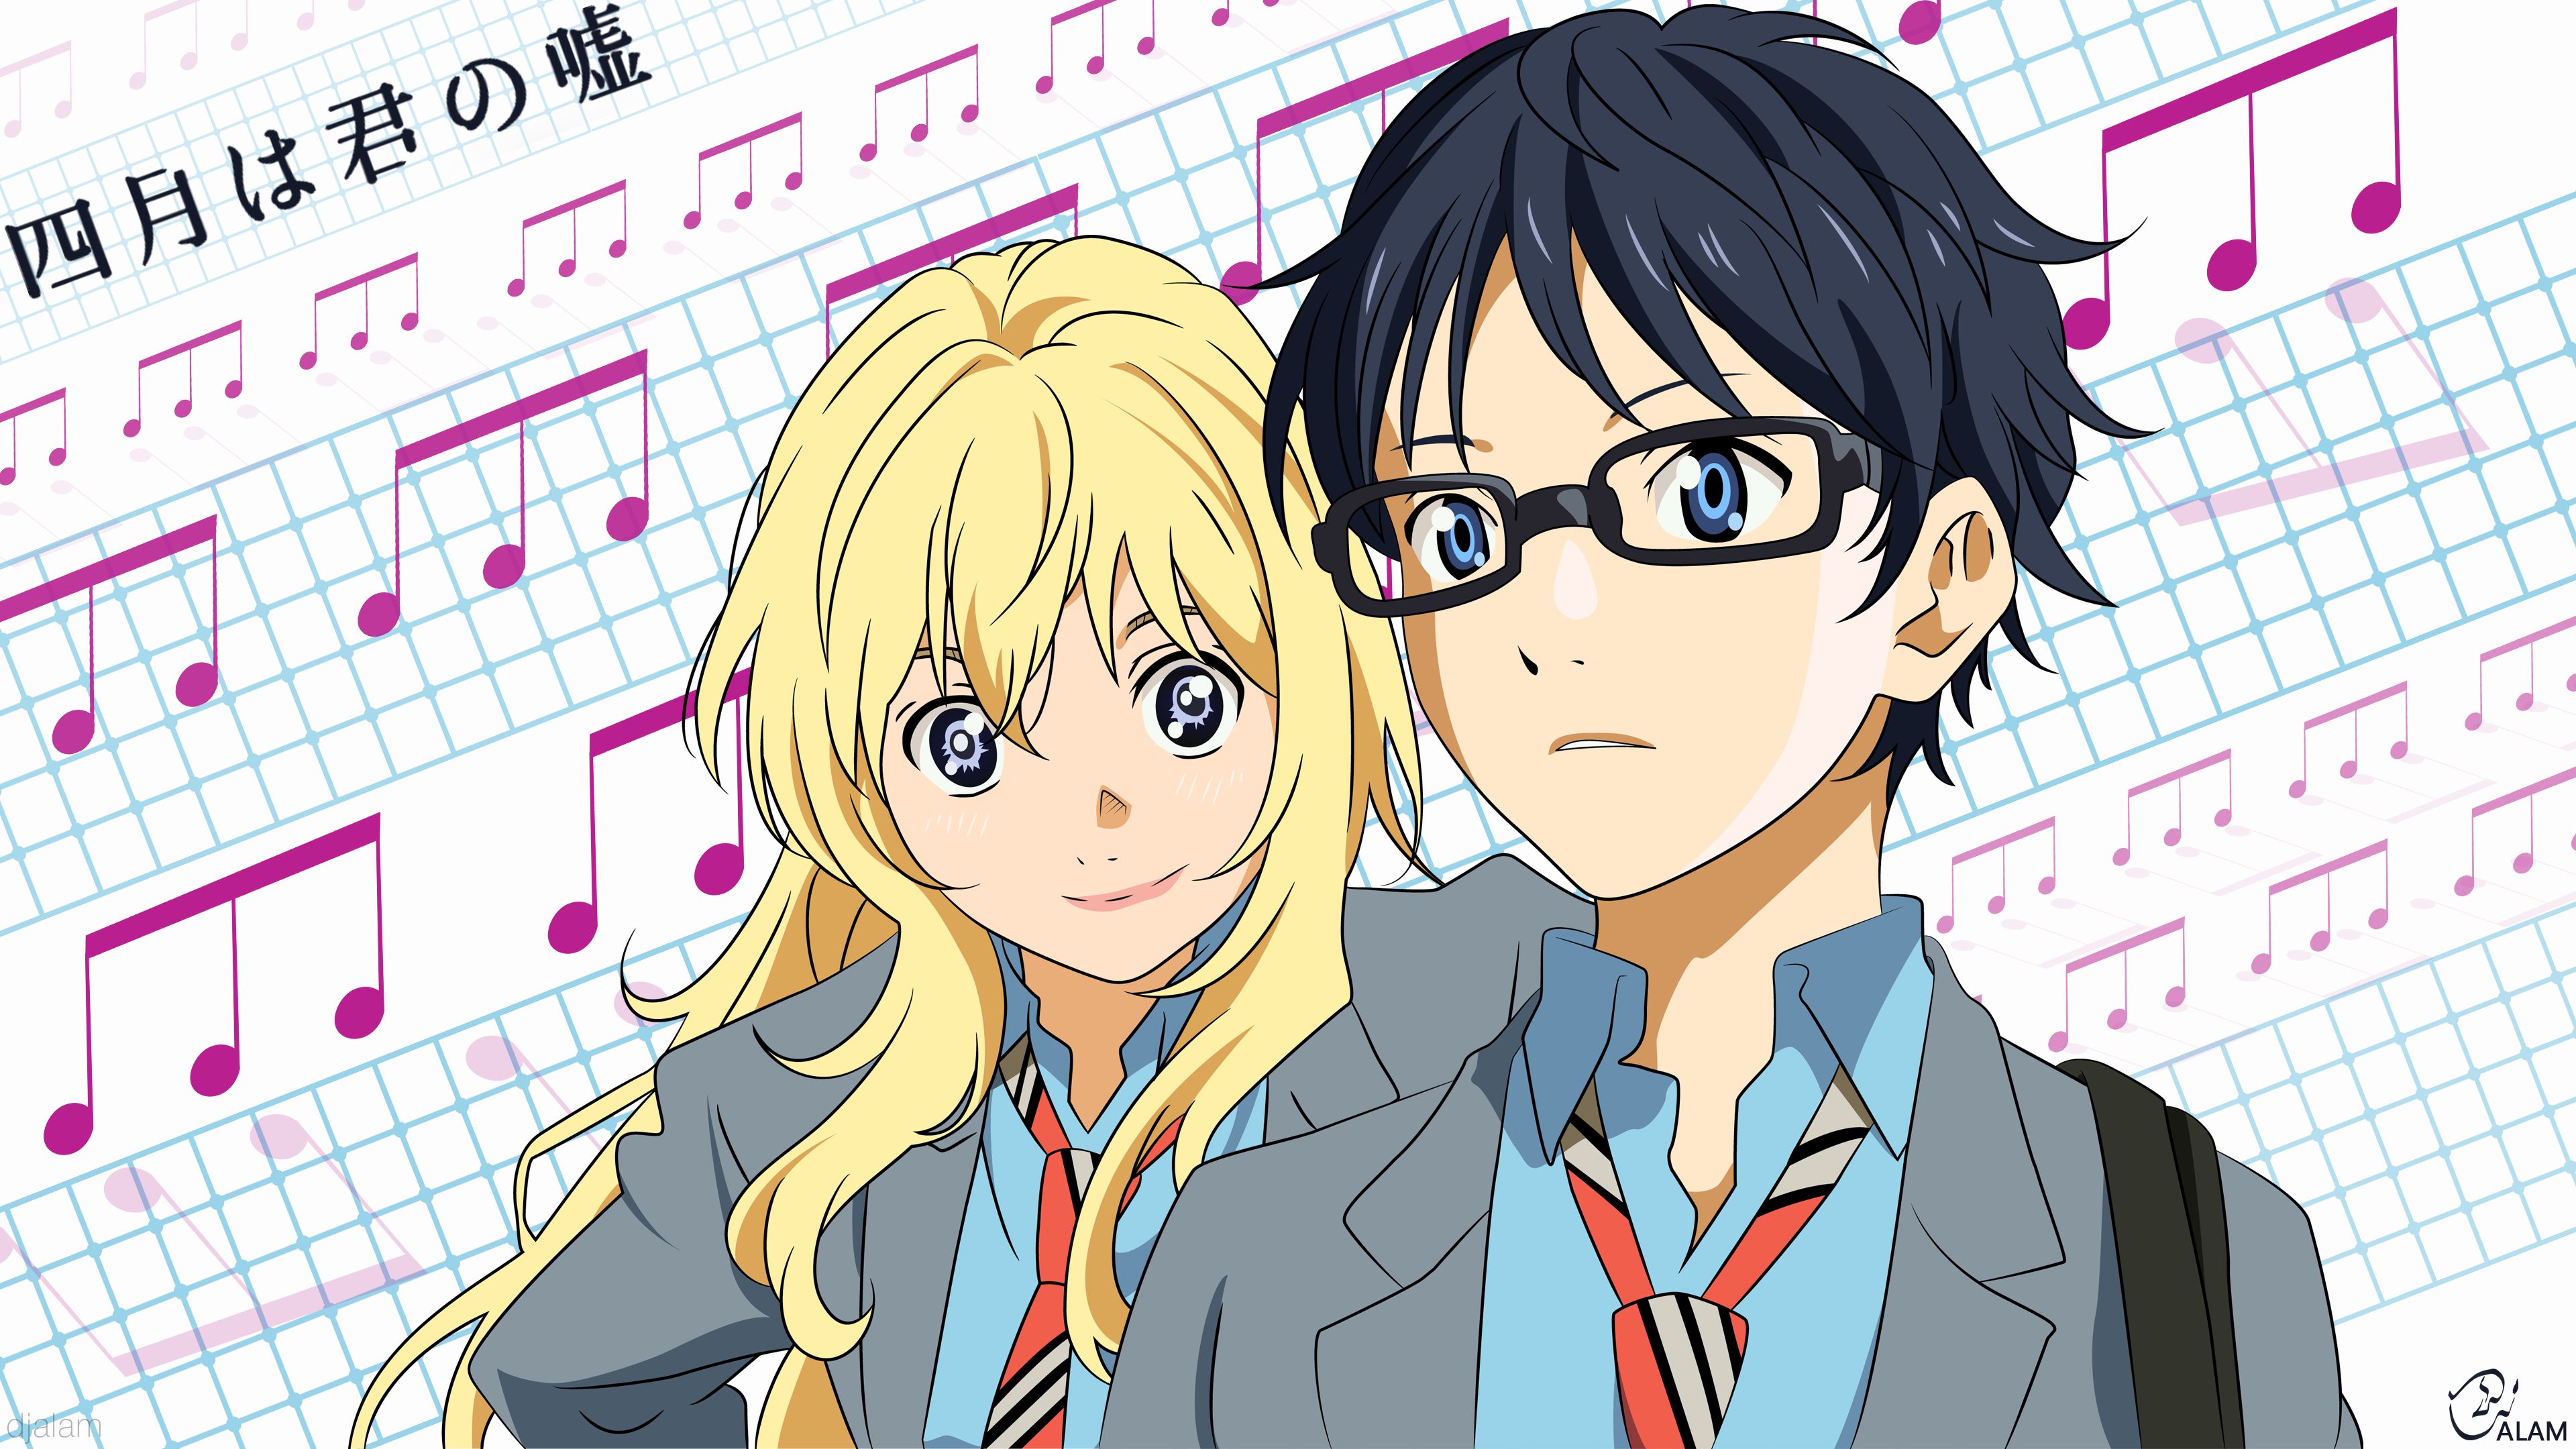 6. "Kousei Arima" from Your Lie in April - wide 7